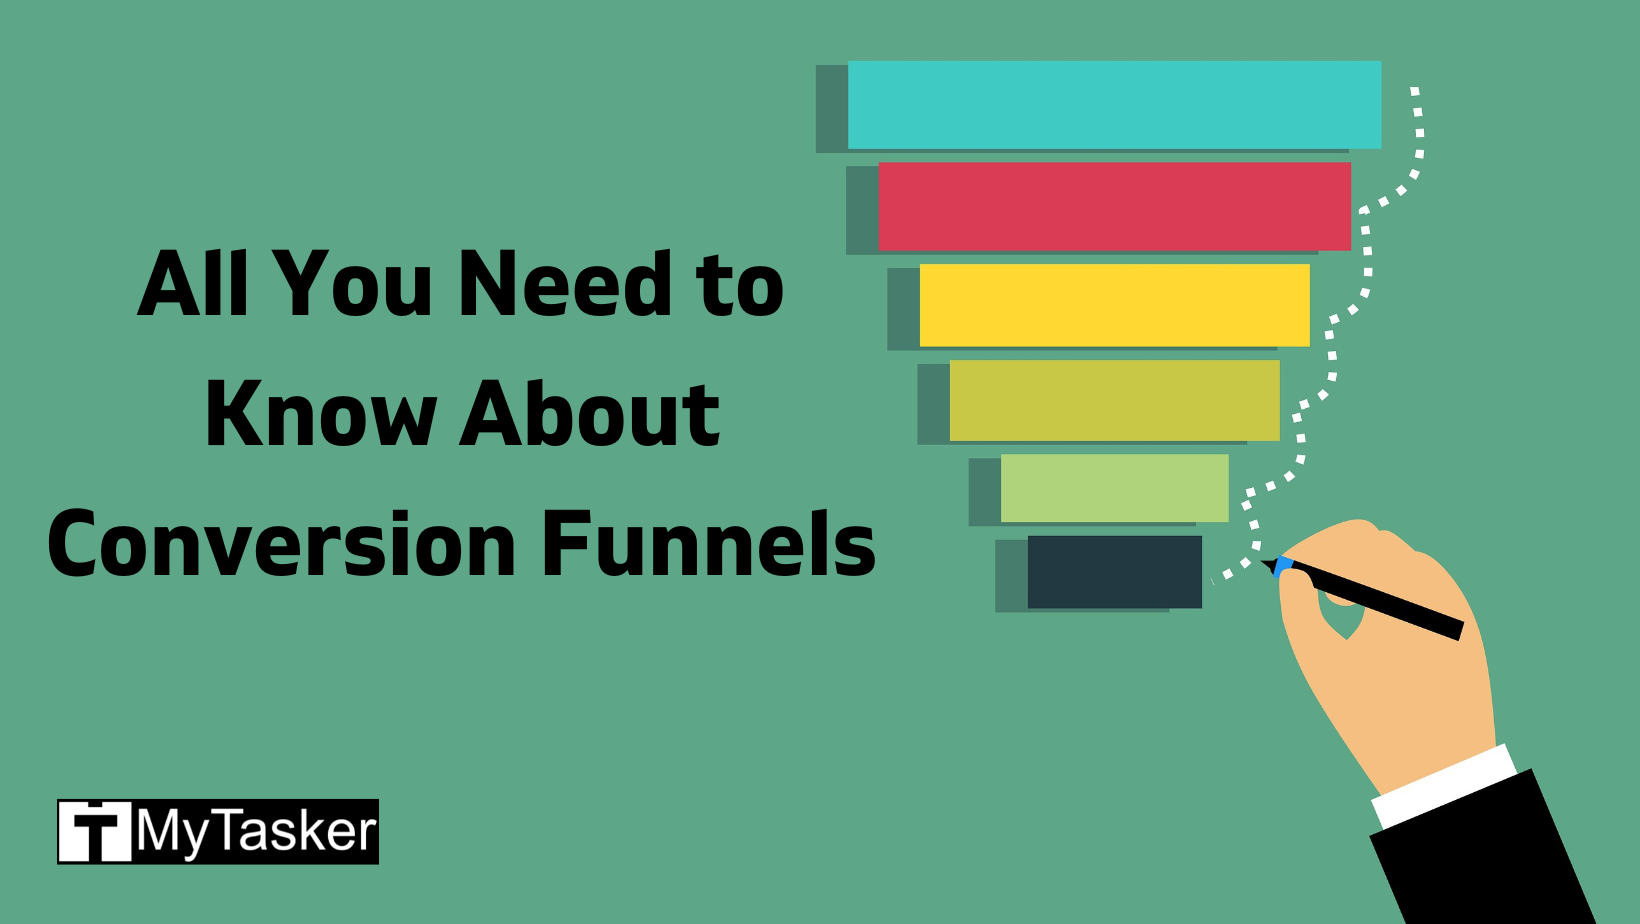 All You Need to Know About Conversion Funnel